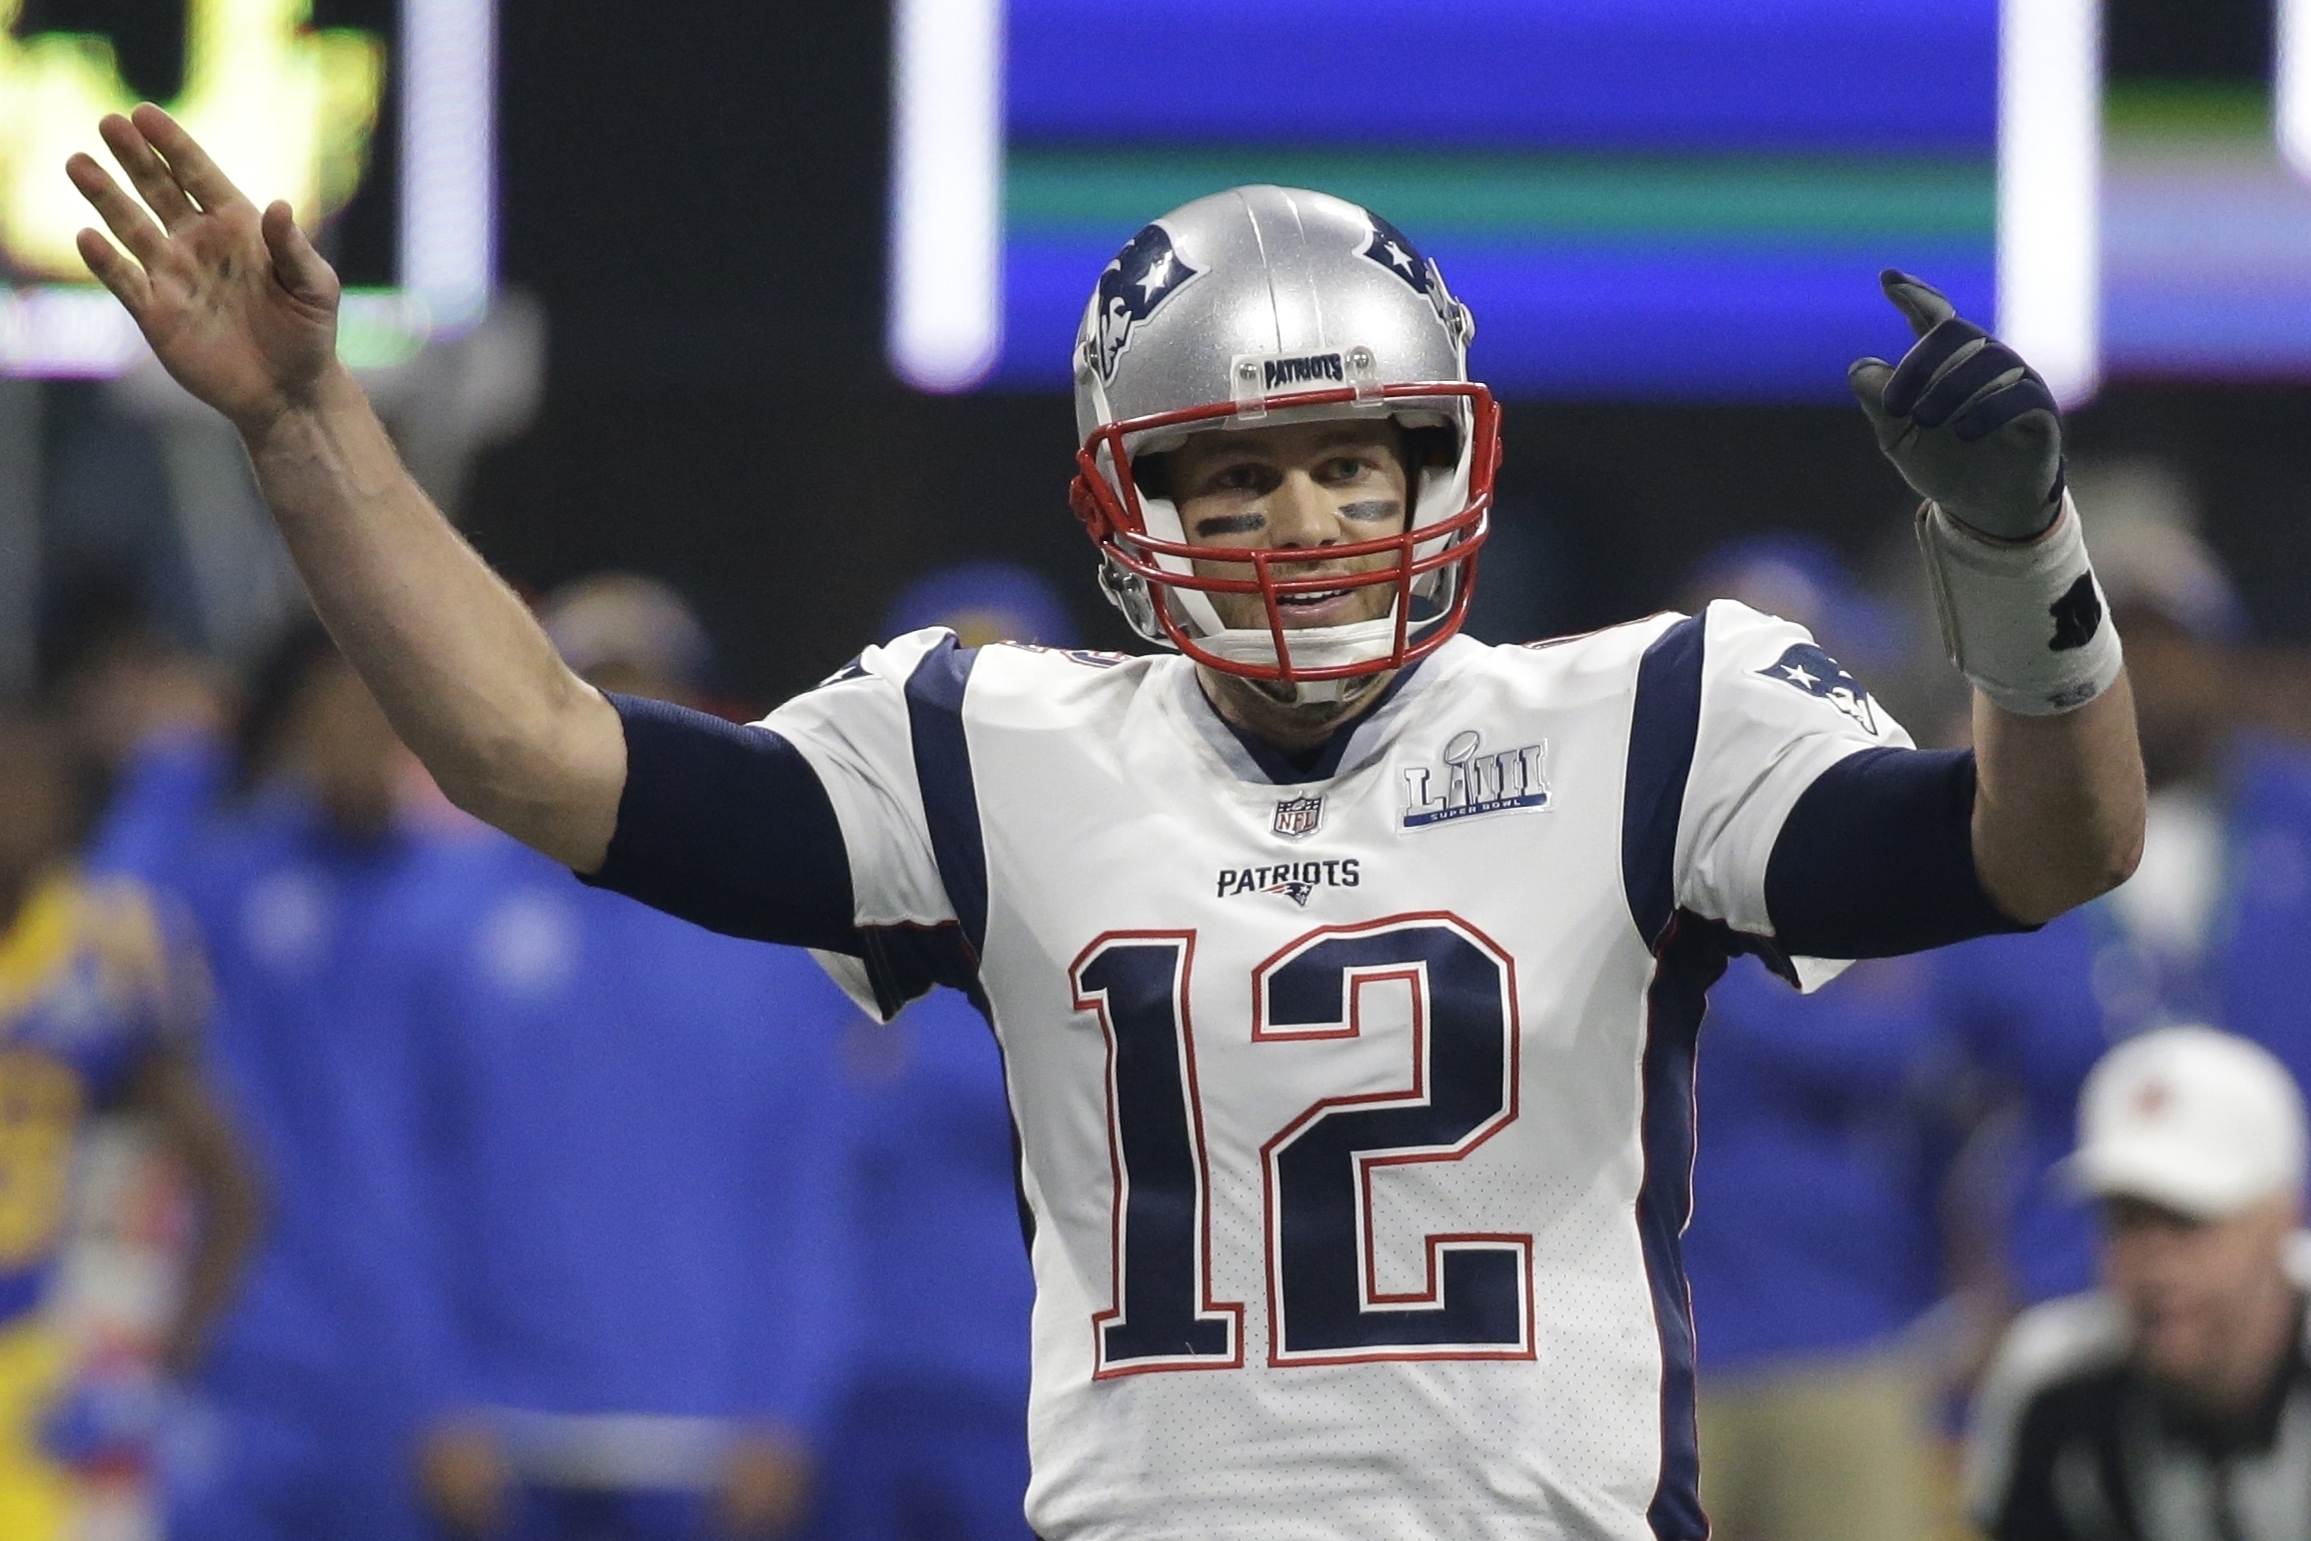 Ranking the Patriots' all-time best uniforms over the years